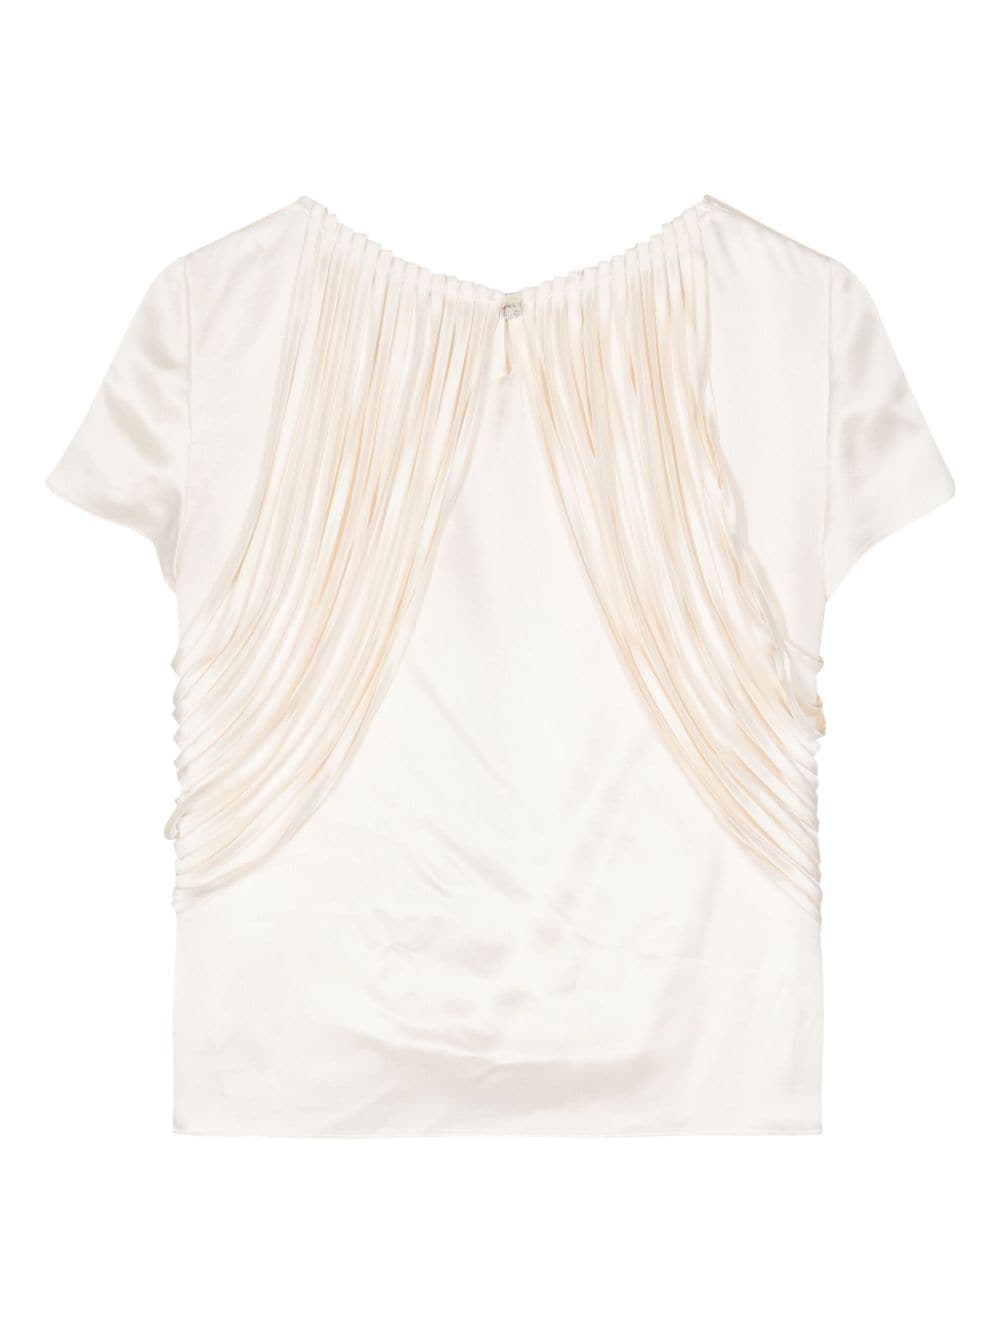 CHANEL Pre-Owned 2000s fringed silk top - Beige